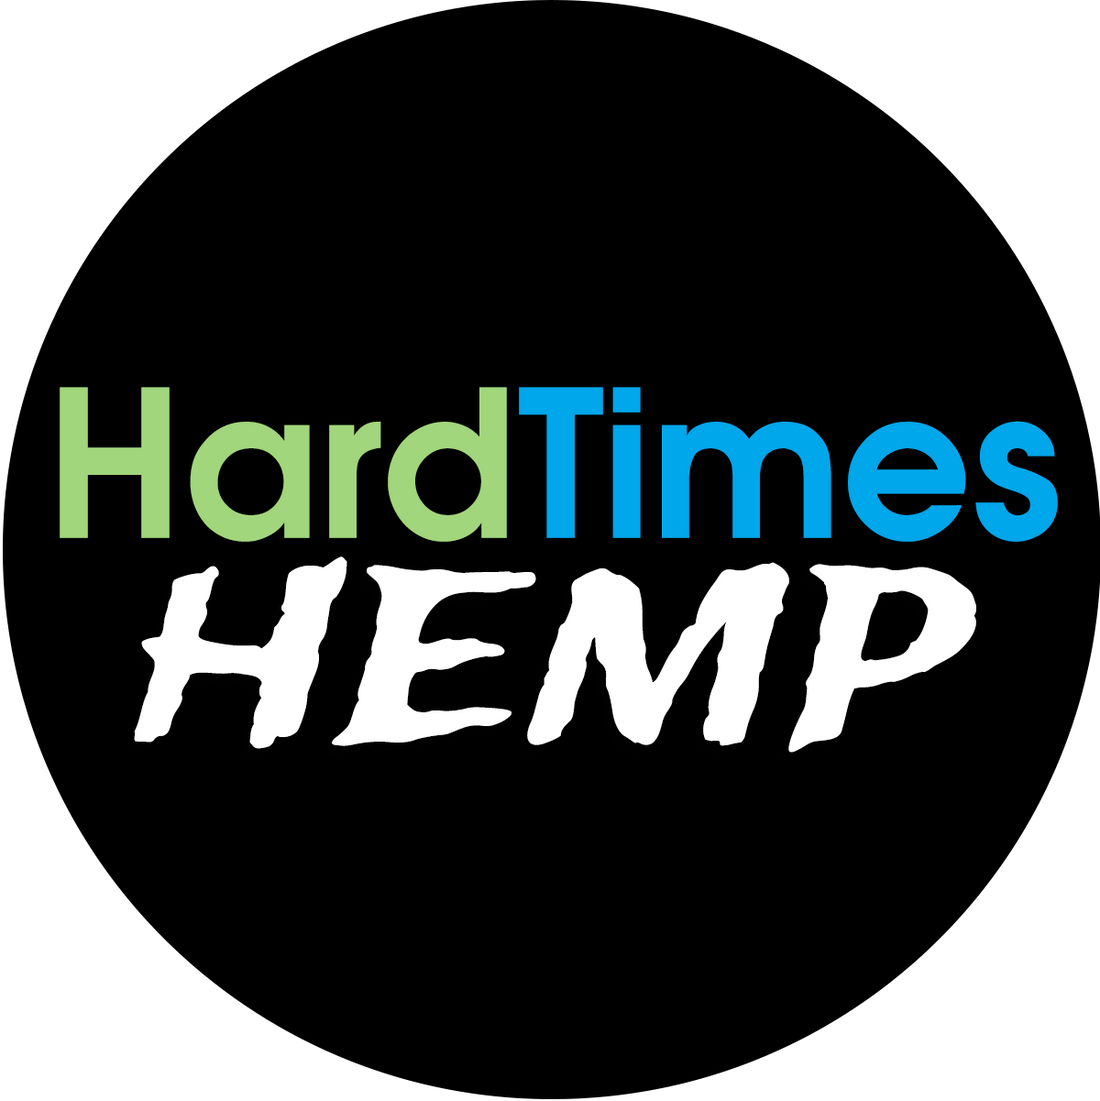 What are the sex benefits of Hard Times Hemp?